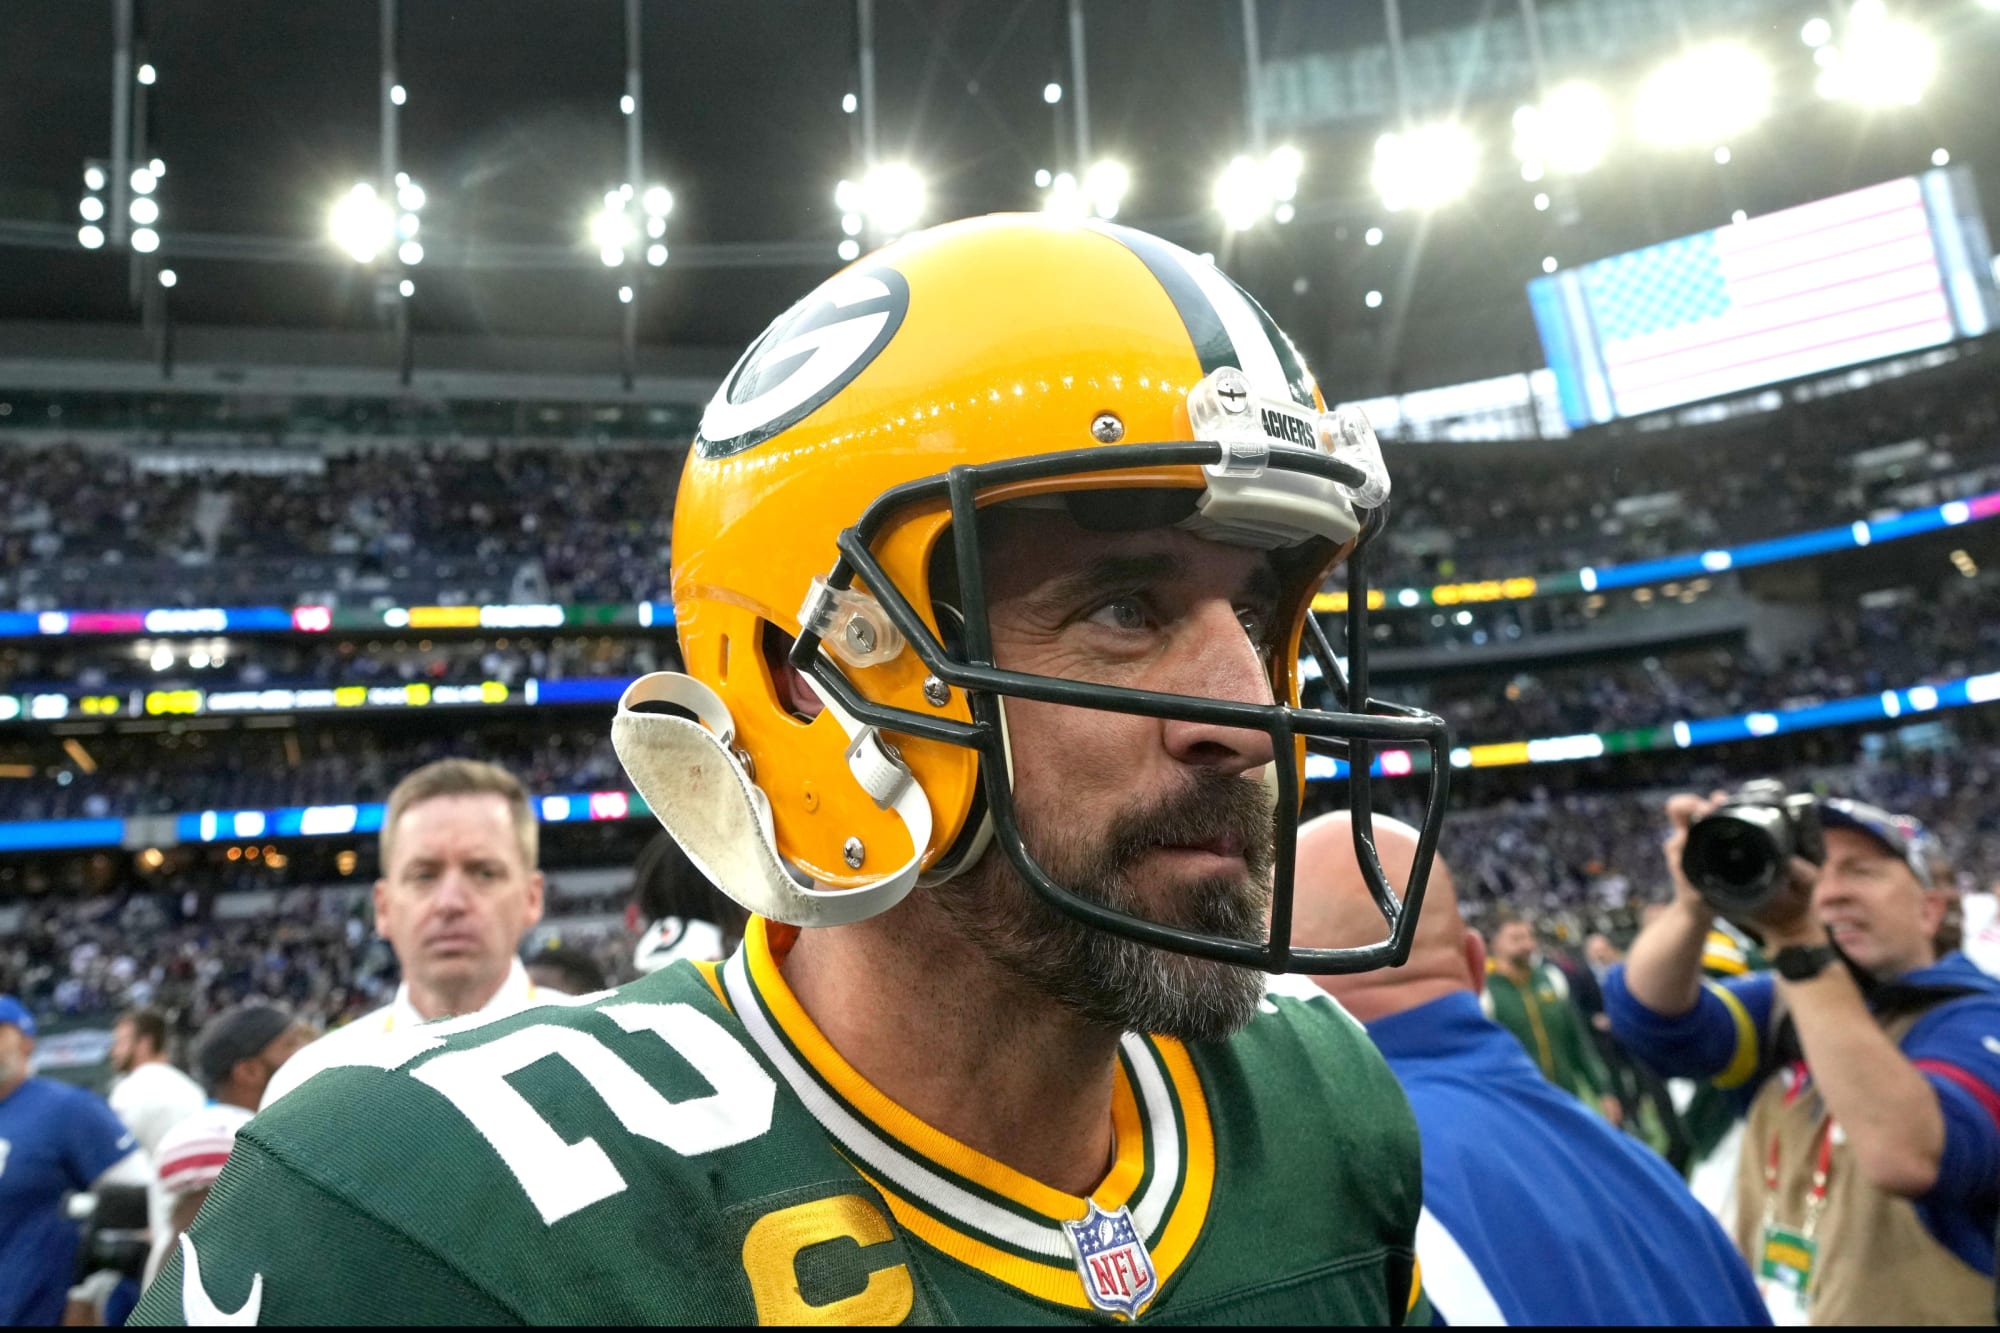 Packers declining bye week after London game a mistake